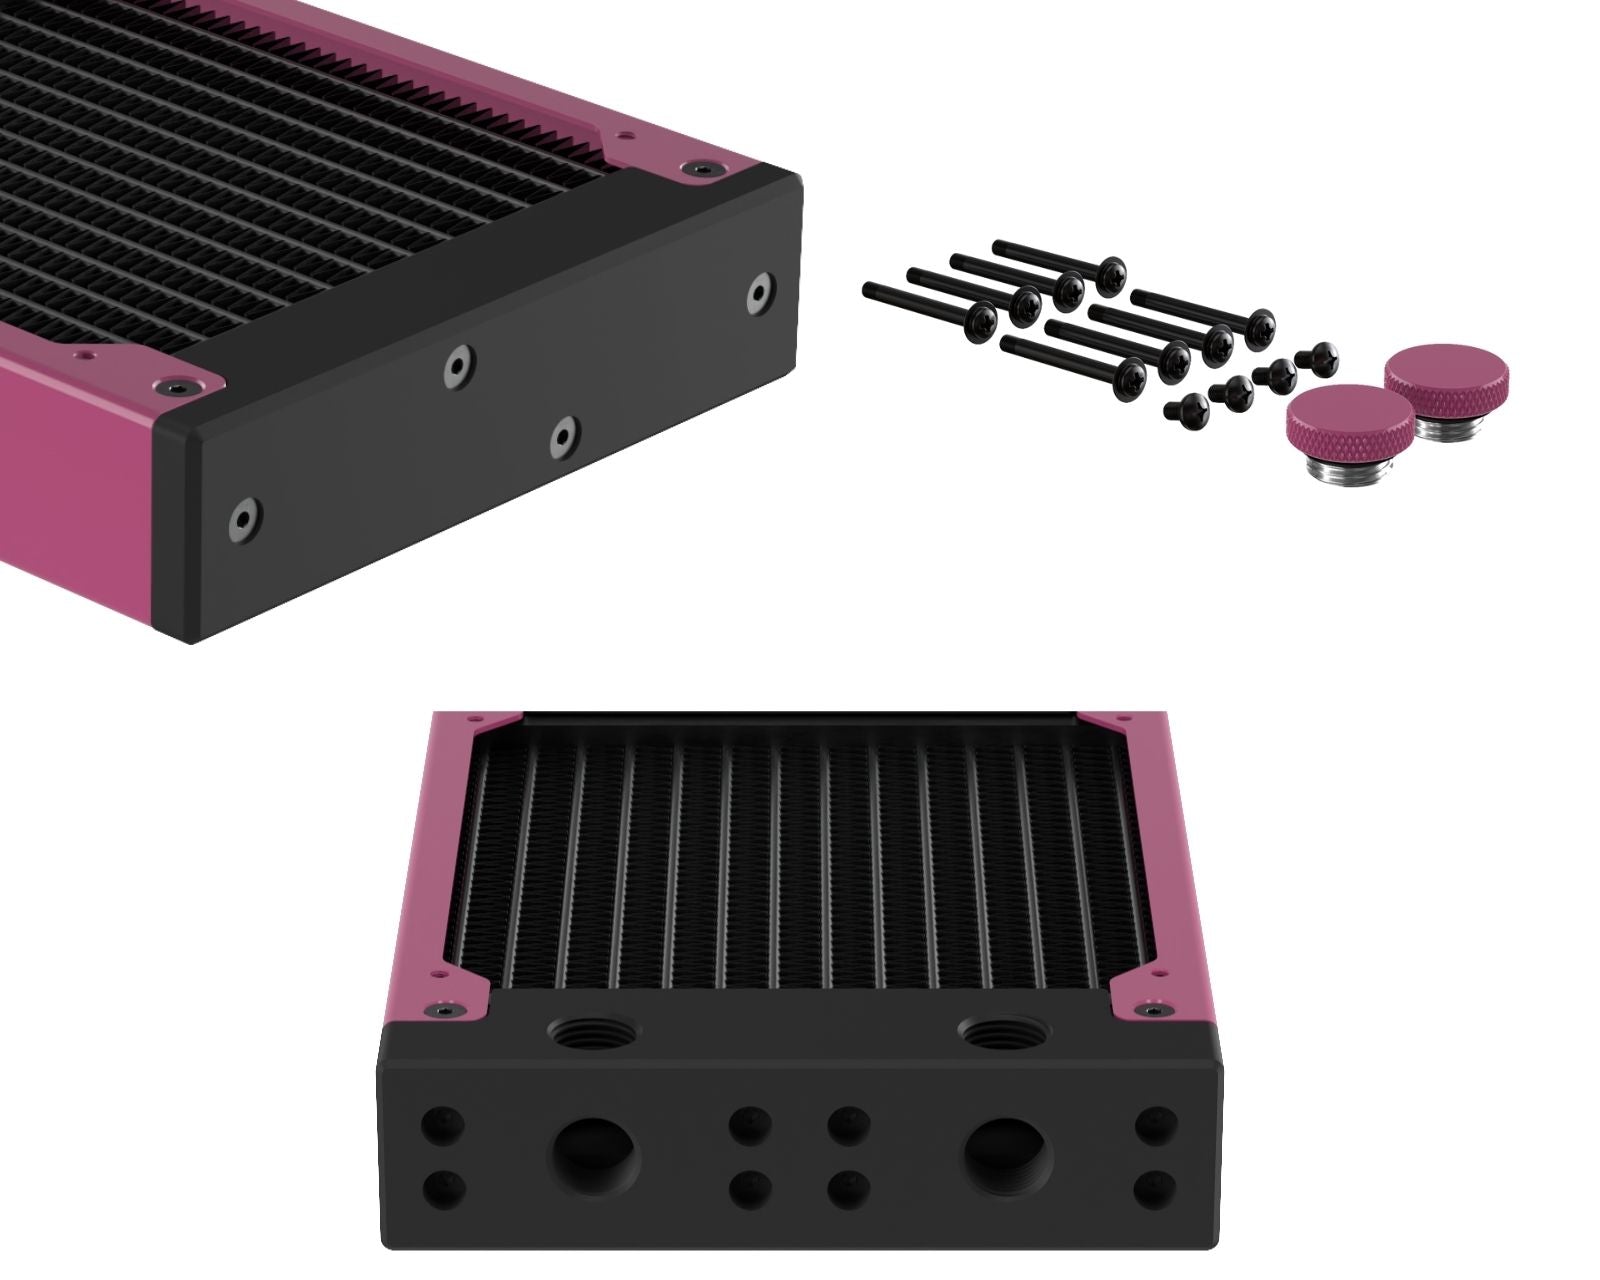 PrimoChill 240SL (30mm) EXIMO Modular Radiator, Black POM, 2x120mm, Dual Fan (R-SL-BK24) Available in 20+ Colors, Assembled in USA and Custom Watercooling Loop Ready - Magenta